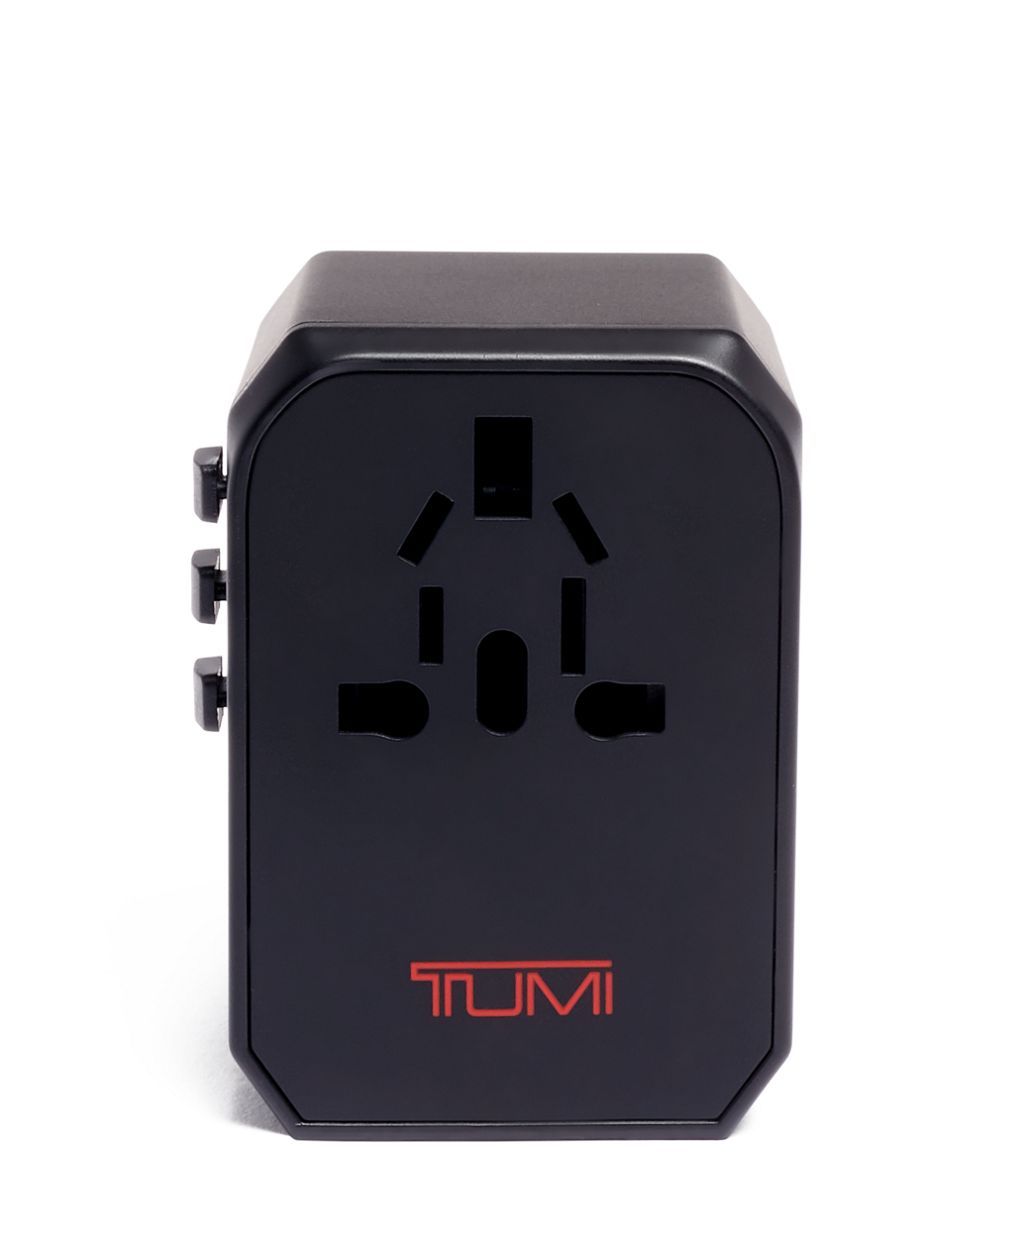 <p><strong>$75.00</strong></p><p>There is nothing worse than being stranded overseas with a dead iPhone that you can’t recharge because you have the wrong plug. This Tumi power adapter is one of the first things I pack. It works in 150 countries around the world and includes four USB ports, so your gadget can stay well juiced. <em>—I.A.</em></p>